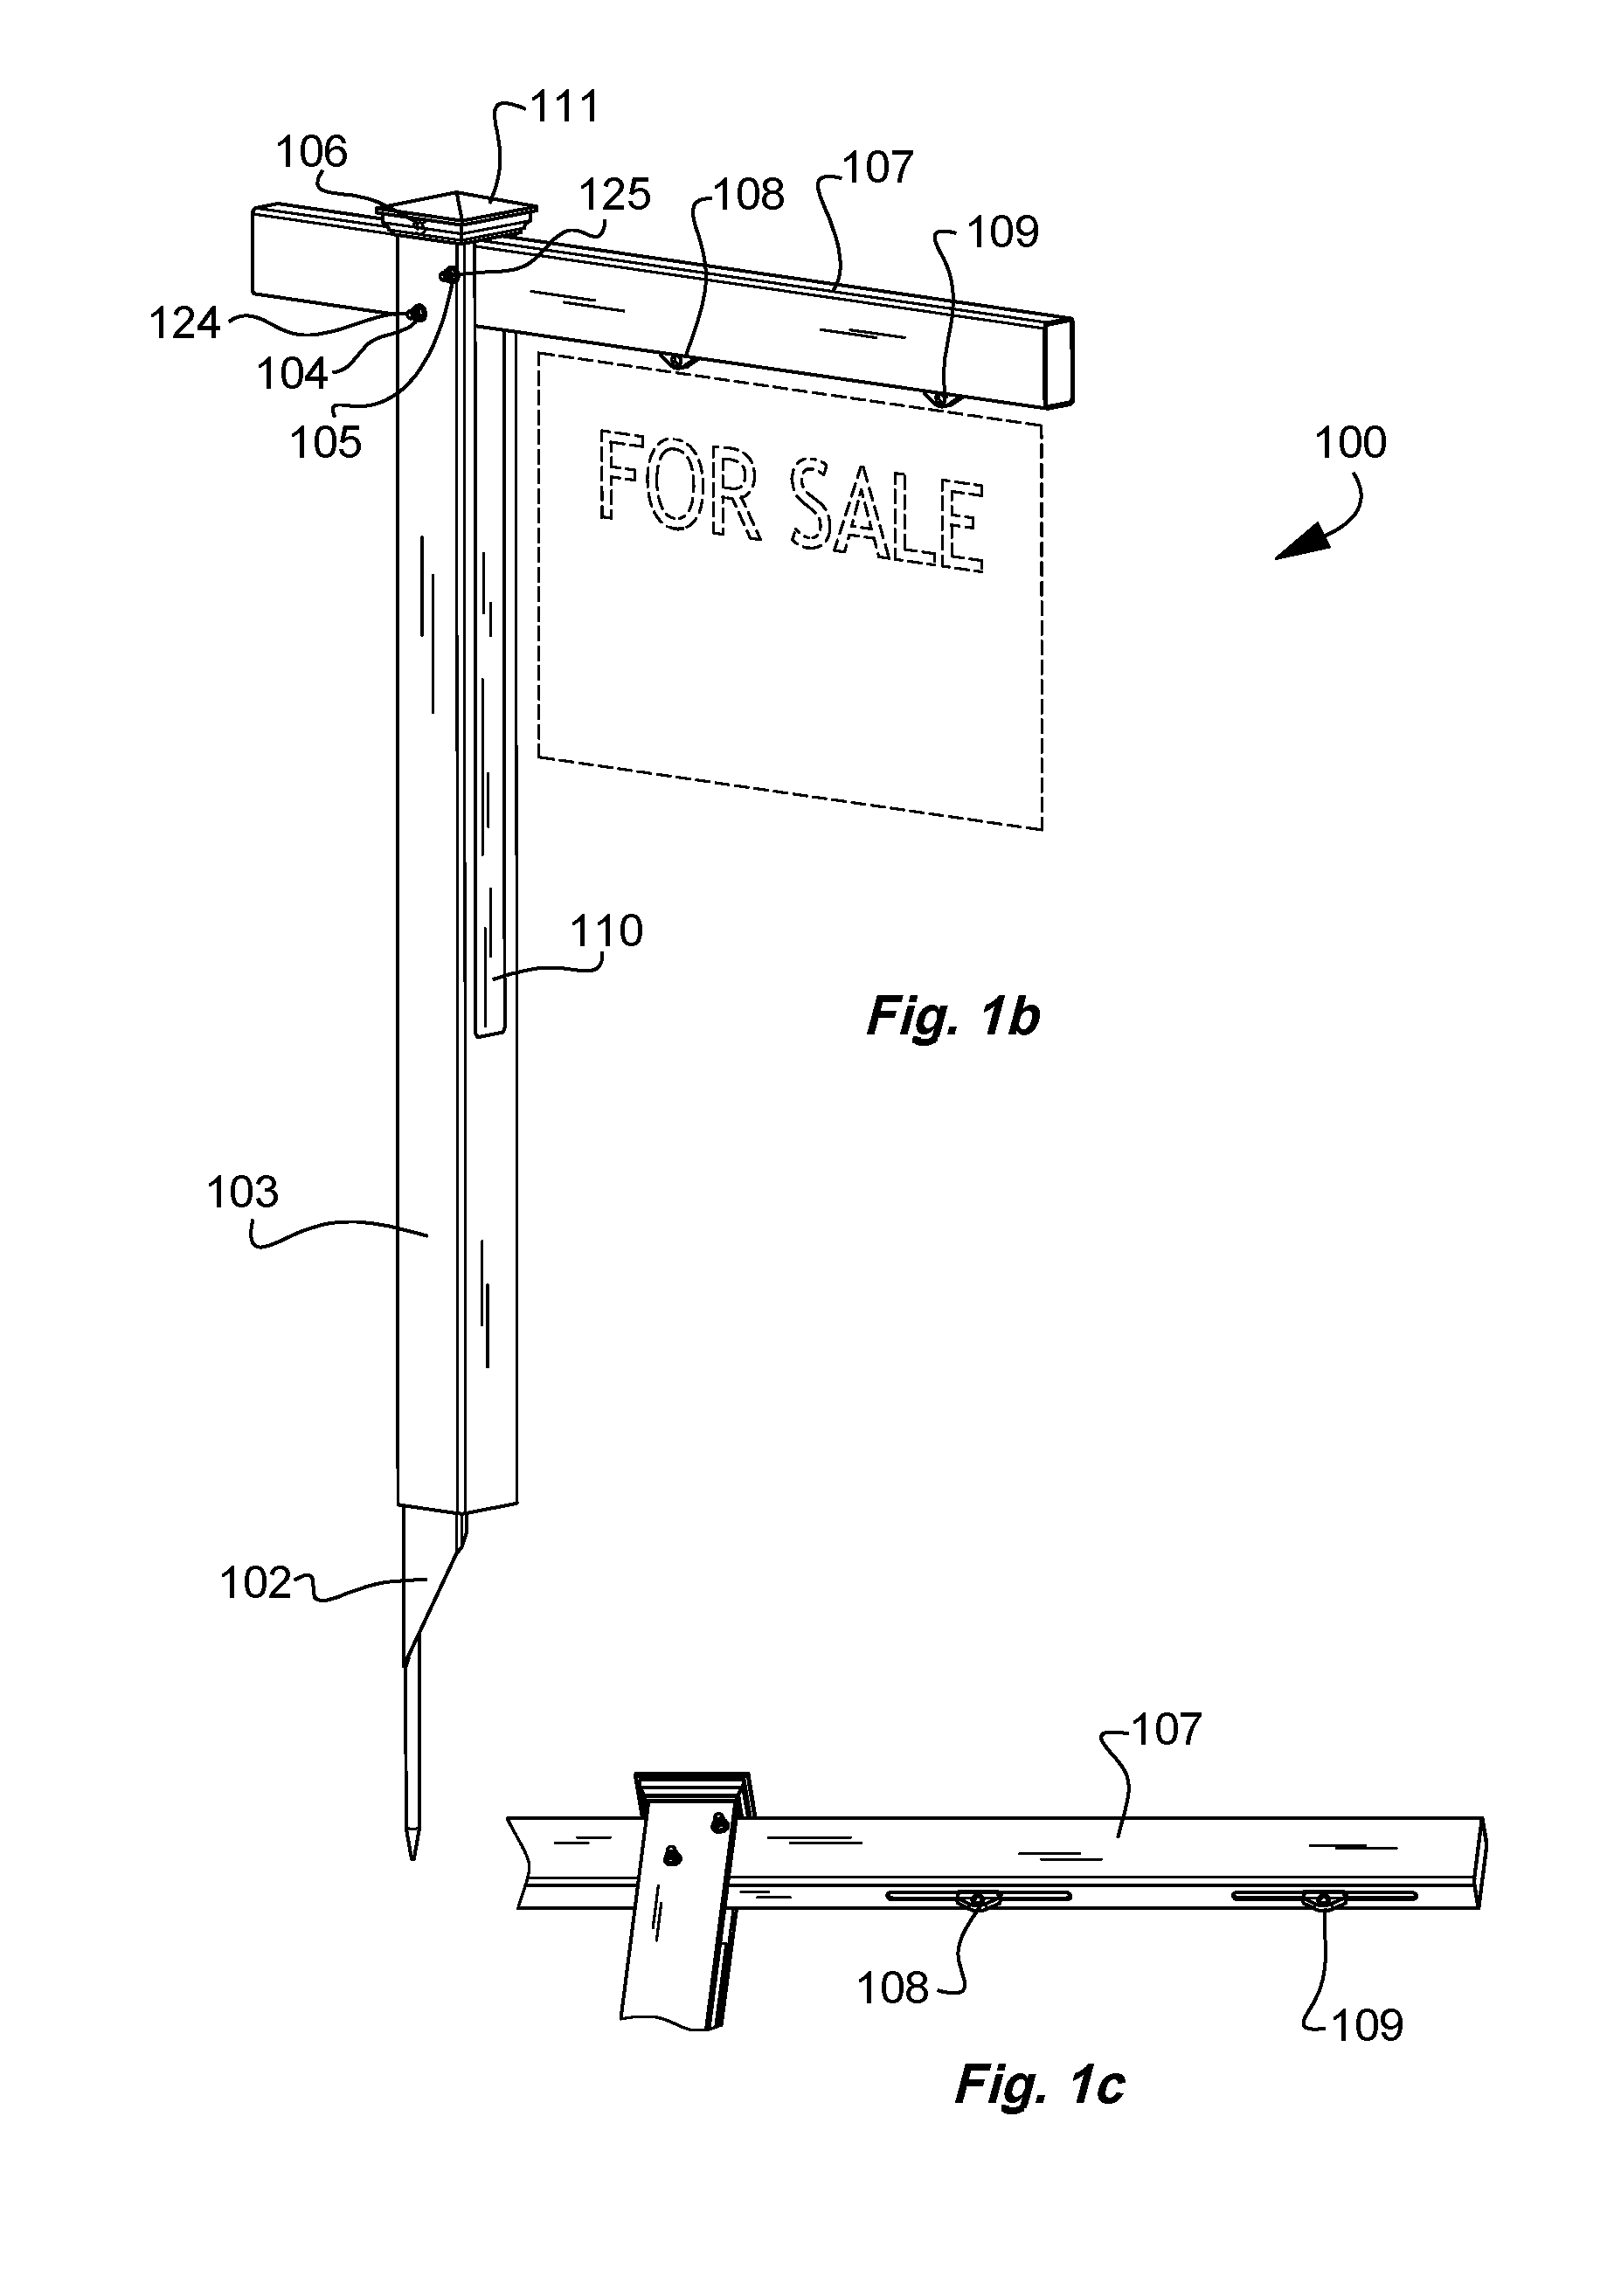 Collapsible sign post apparatus